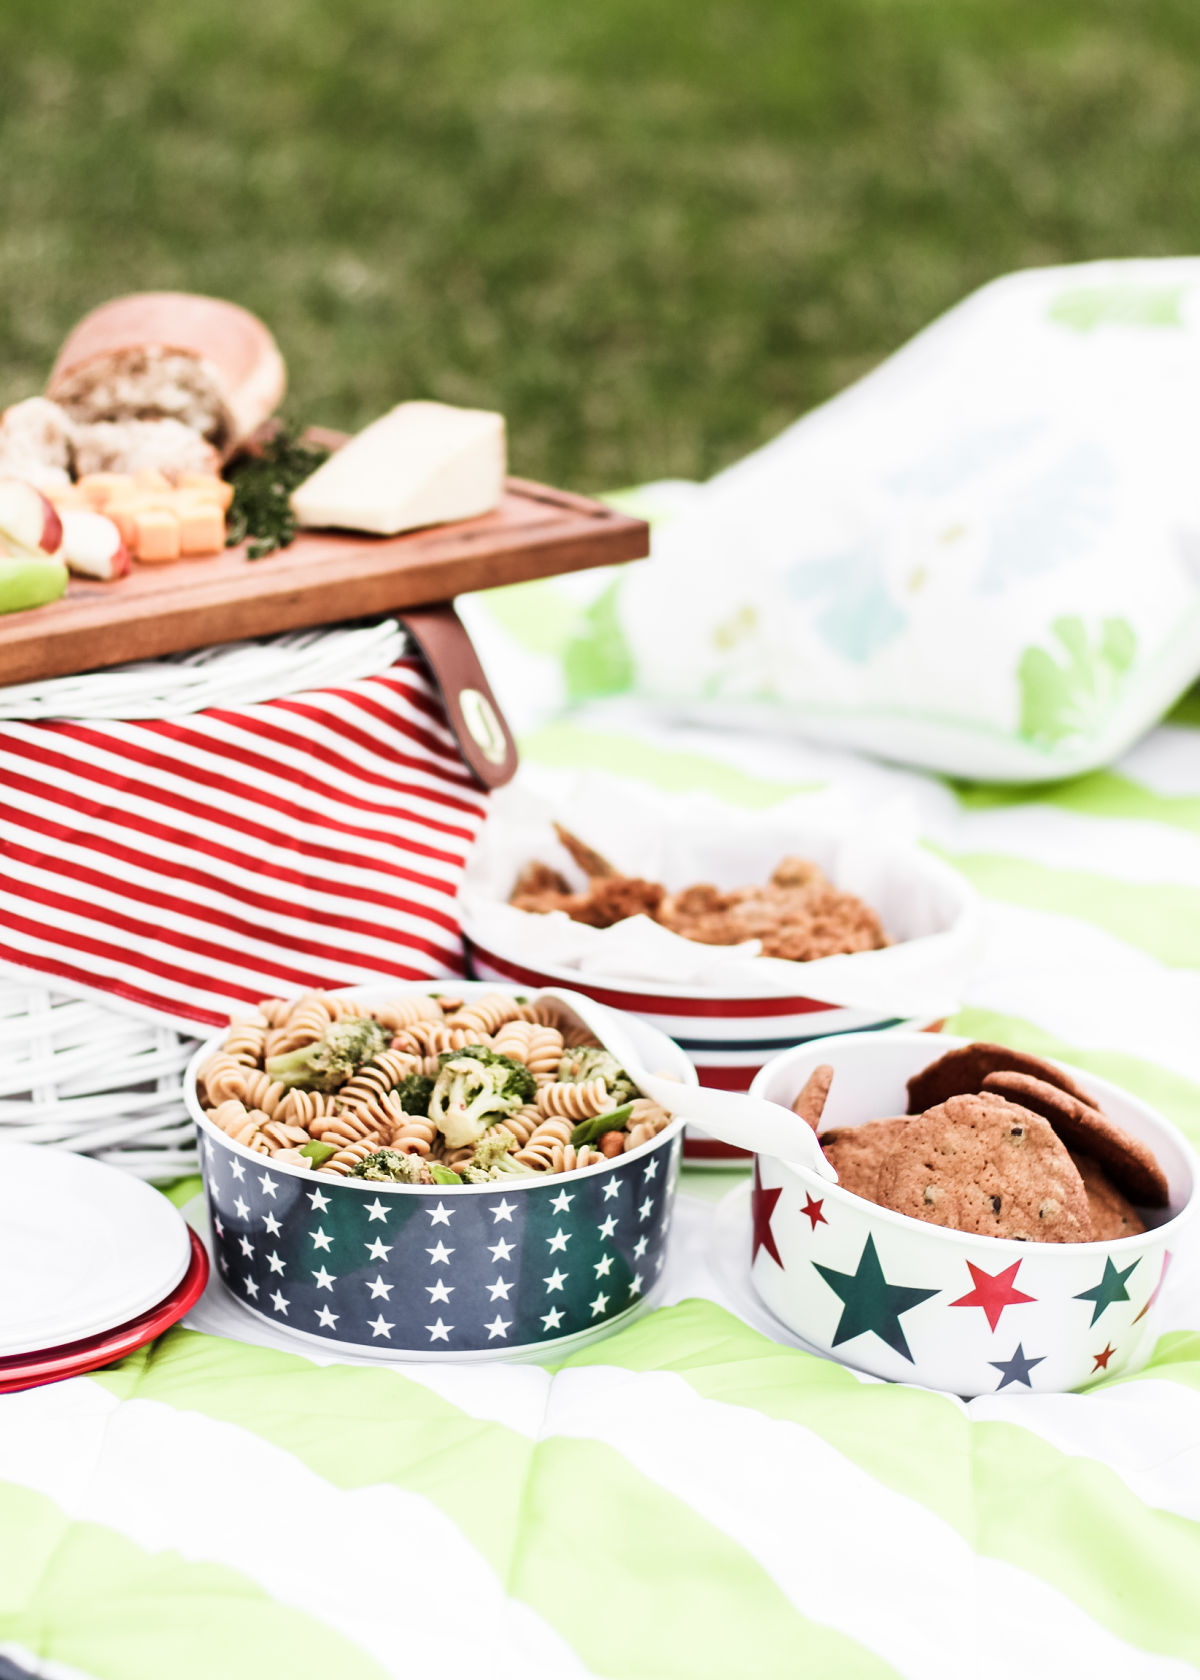 picnic outside with blanket and food in bowls.